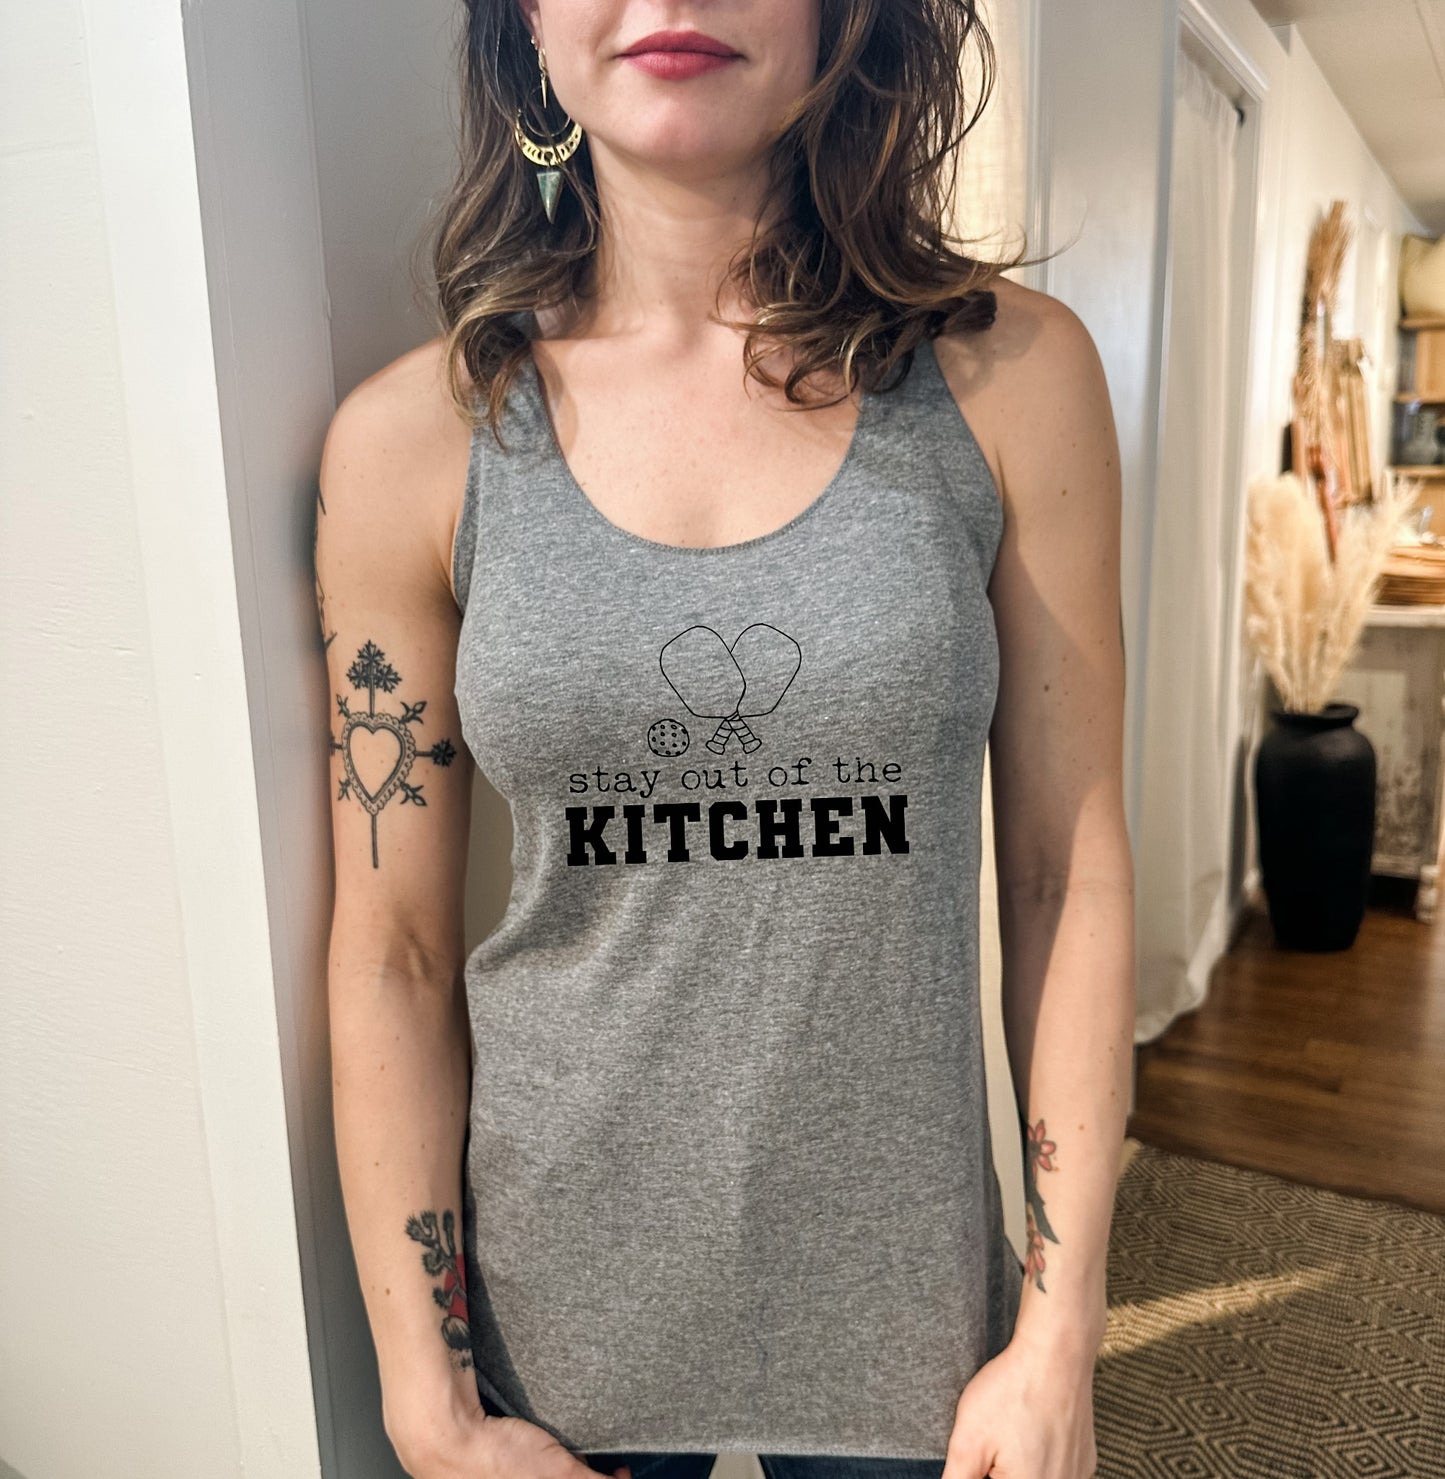 a woman wearing a gray tank top with the words stay out of the kitchen on